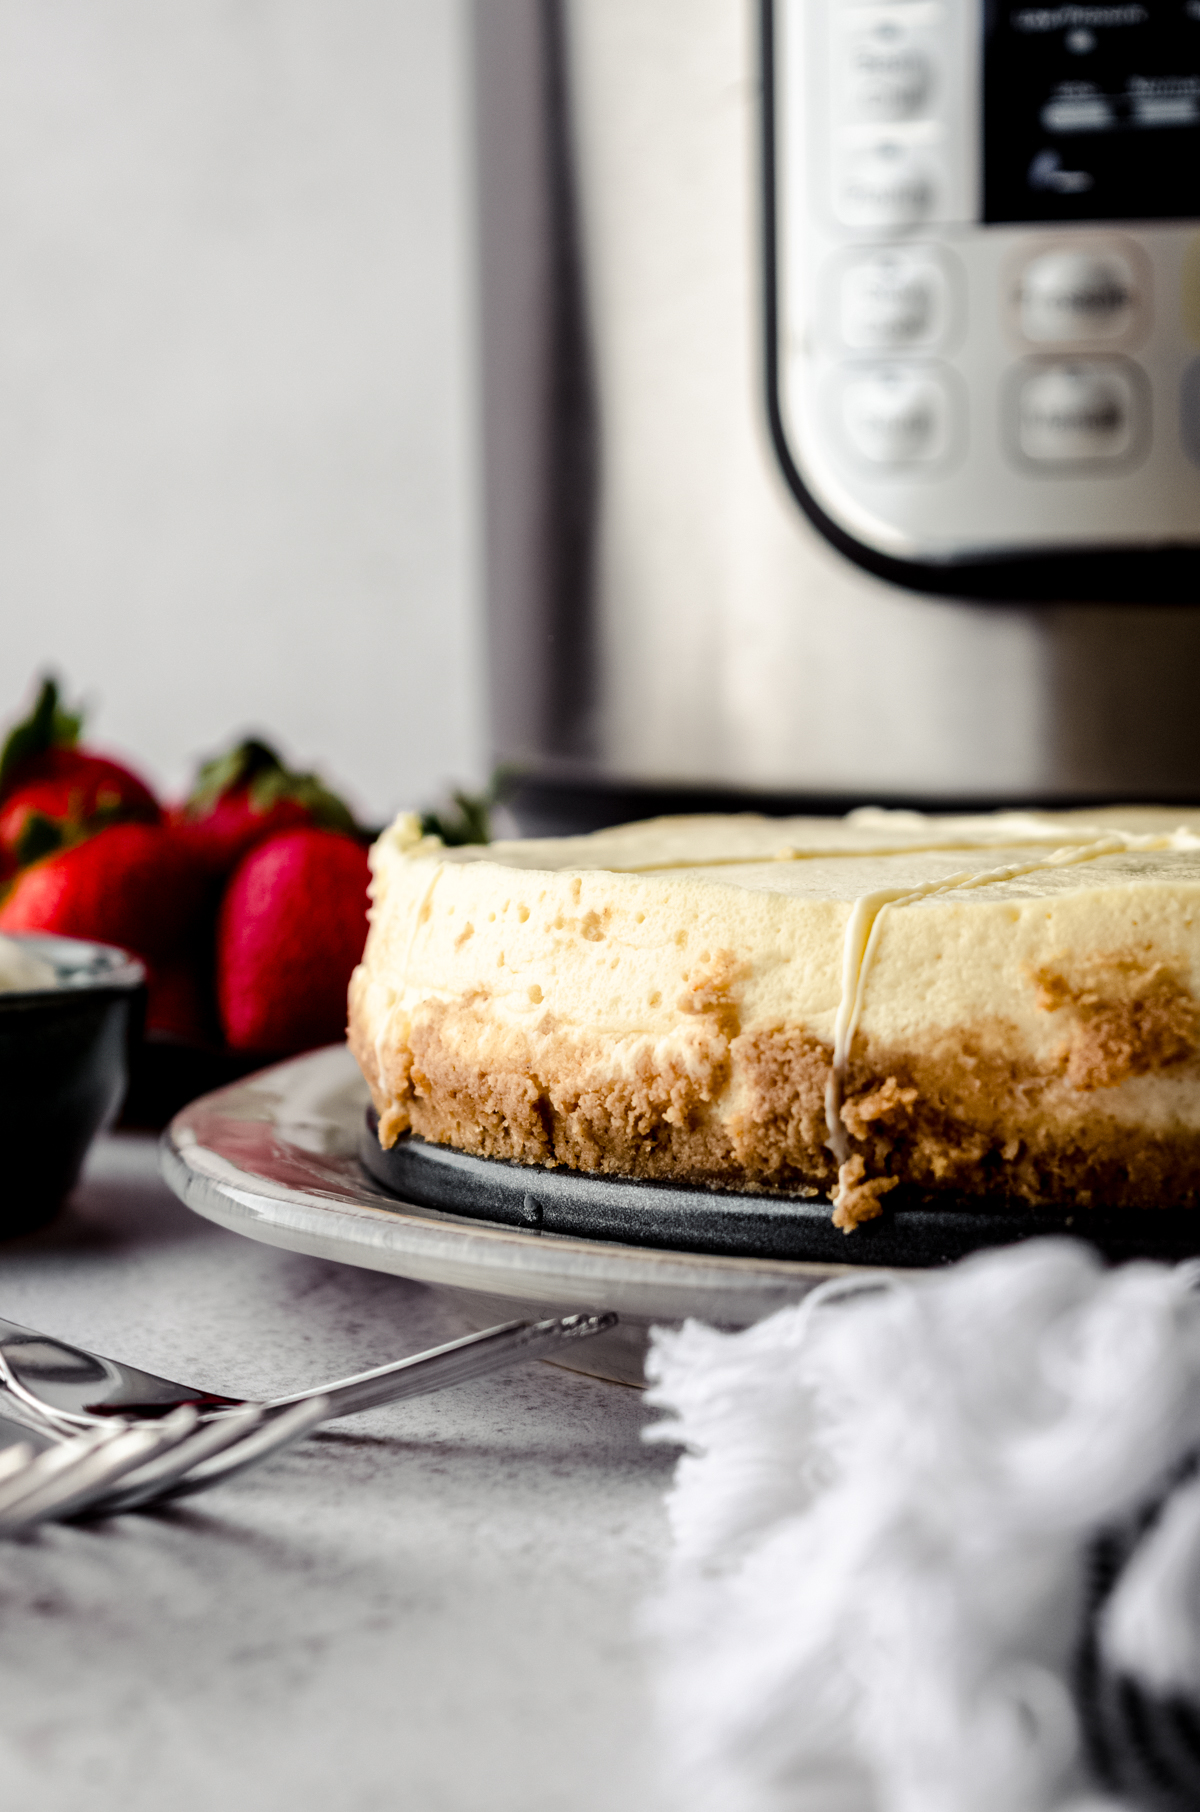 A cheesecake on a platter with an Instant Pot in the background.